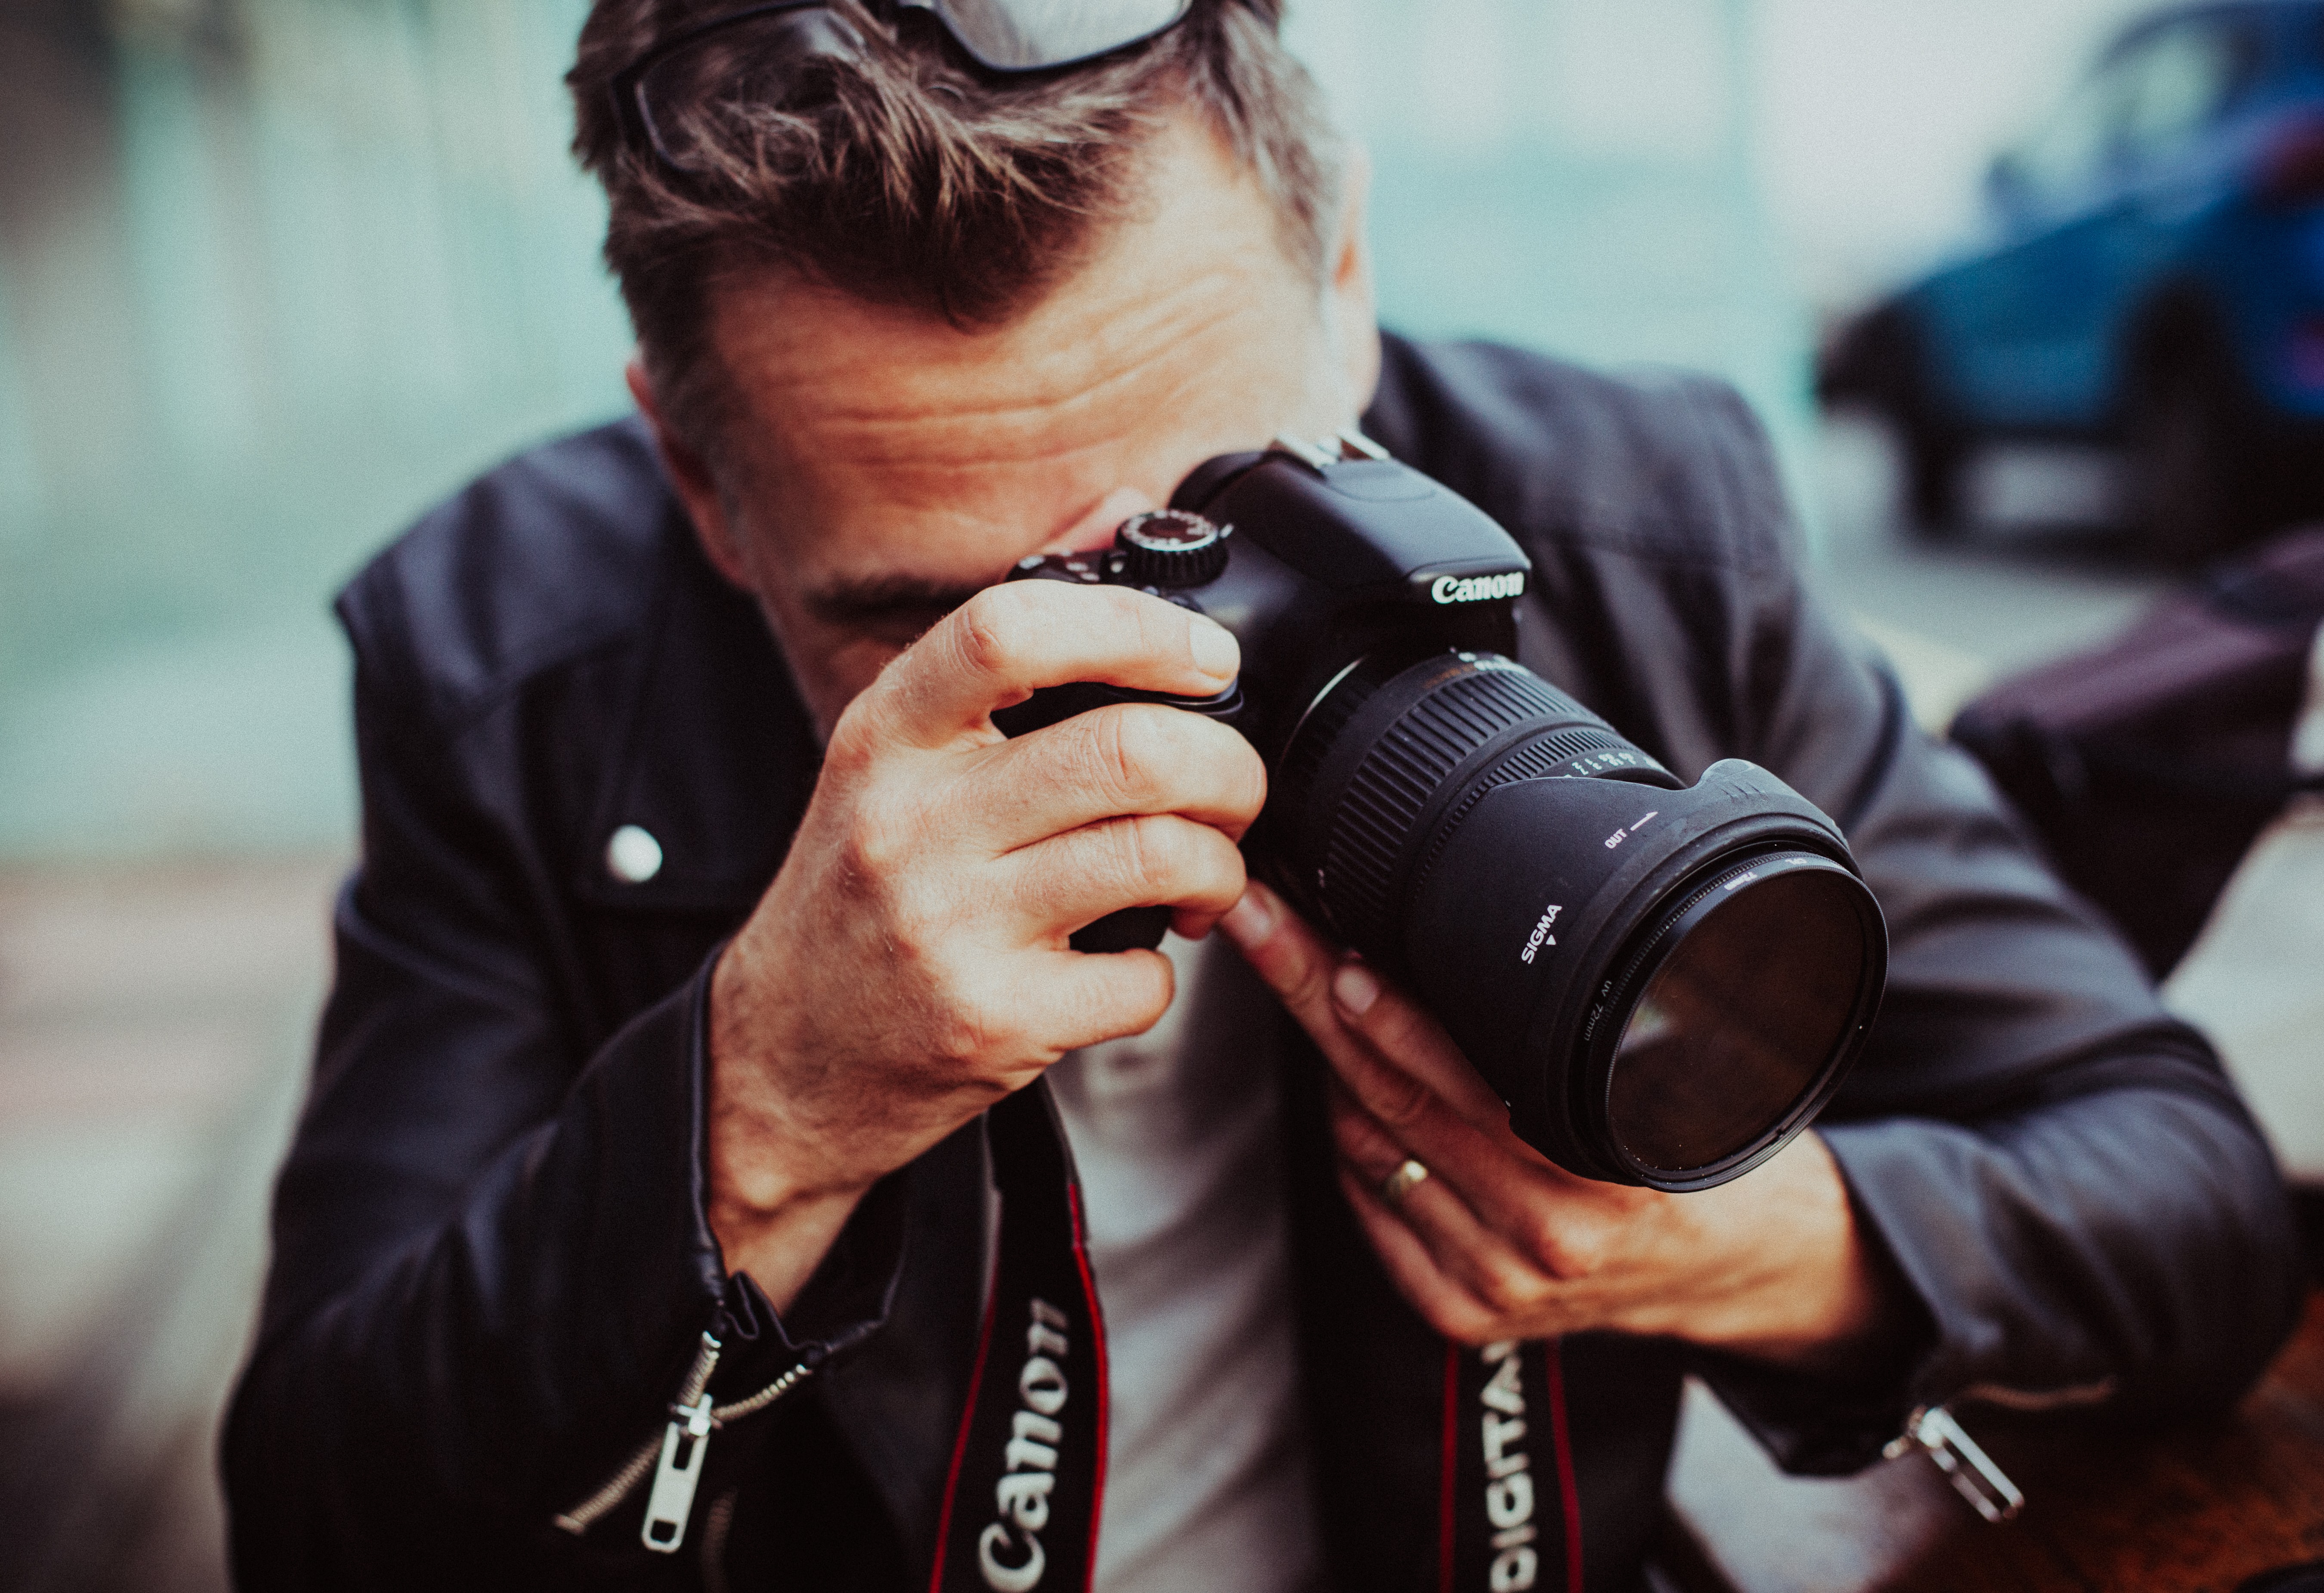 Say CHEESE! Ready to snap up some great events? You bring the camera and we'll find you the perfect events to take your photography business to the next level.